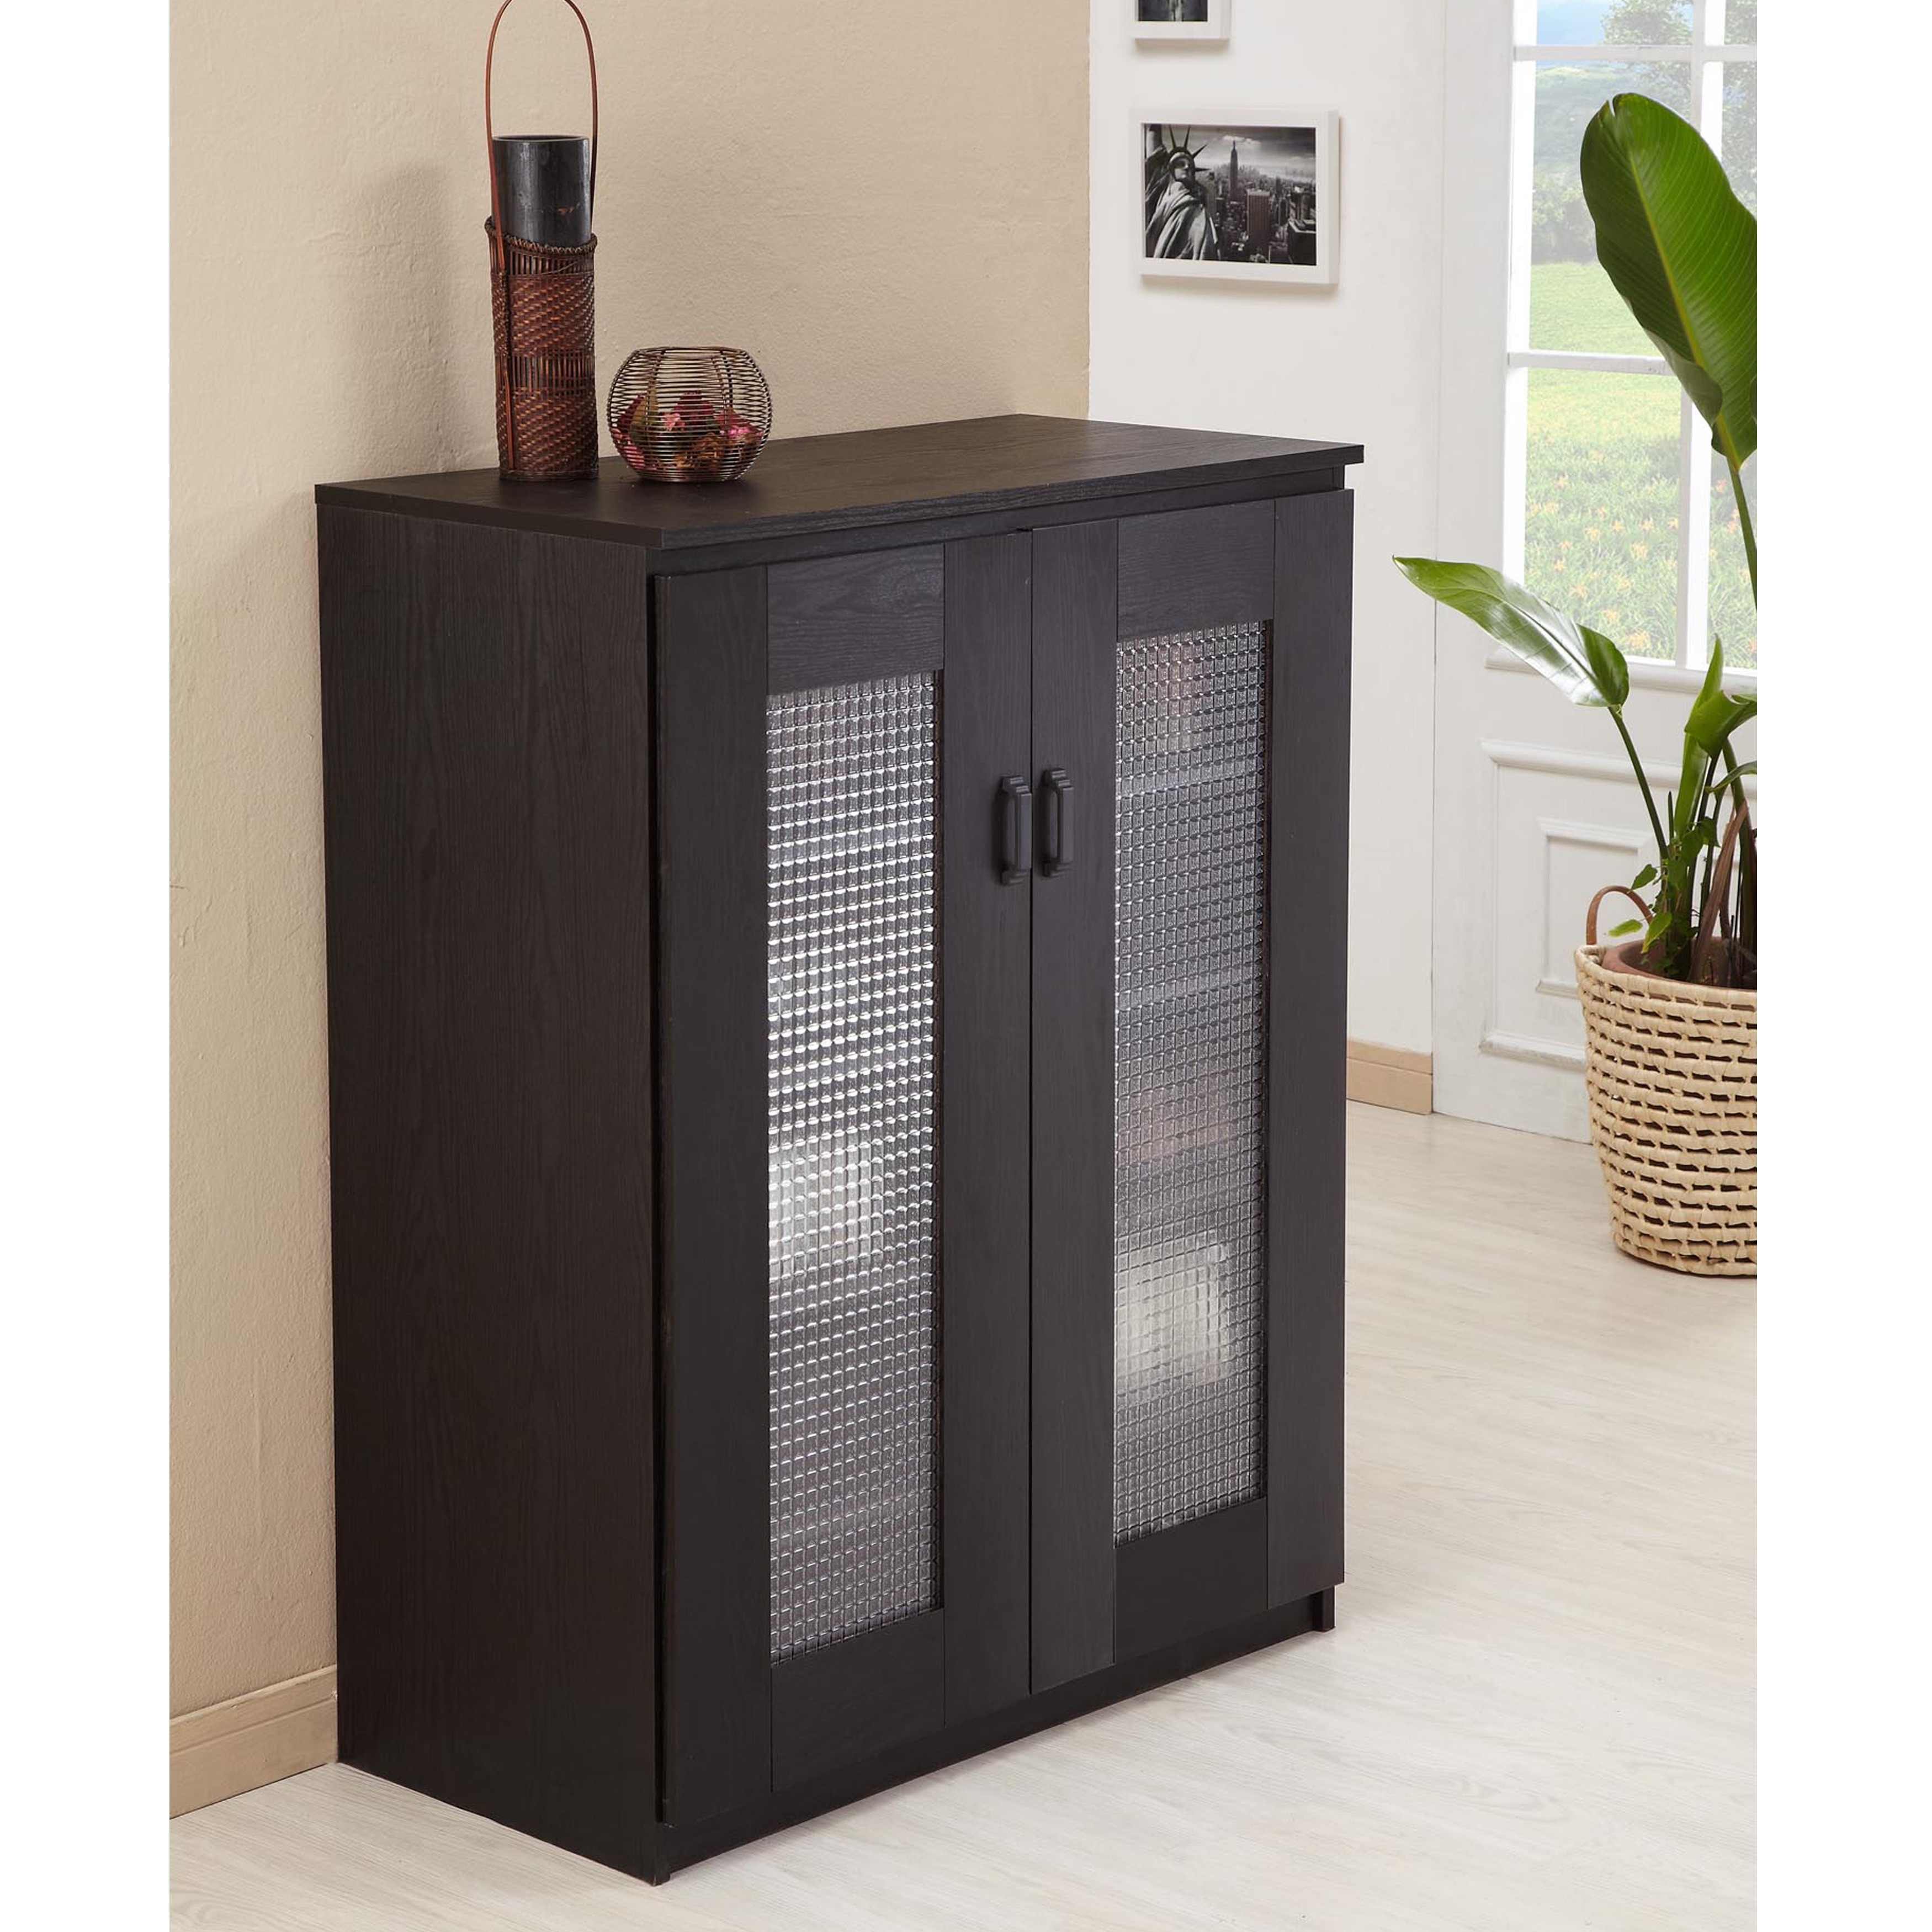 Enitial Lab Linear Shoe/Multi purpose Cabinet Today $190.99 4.4 (26